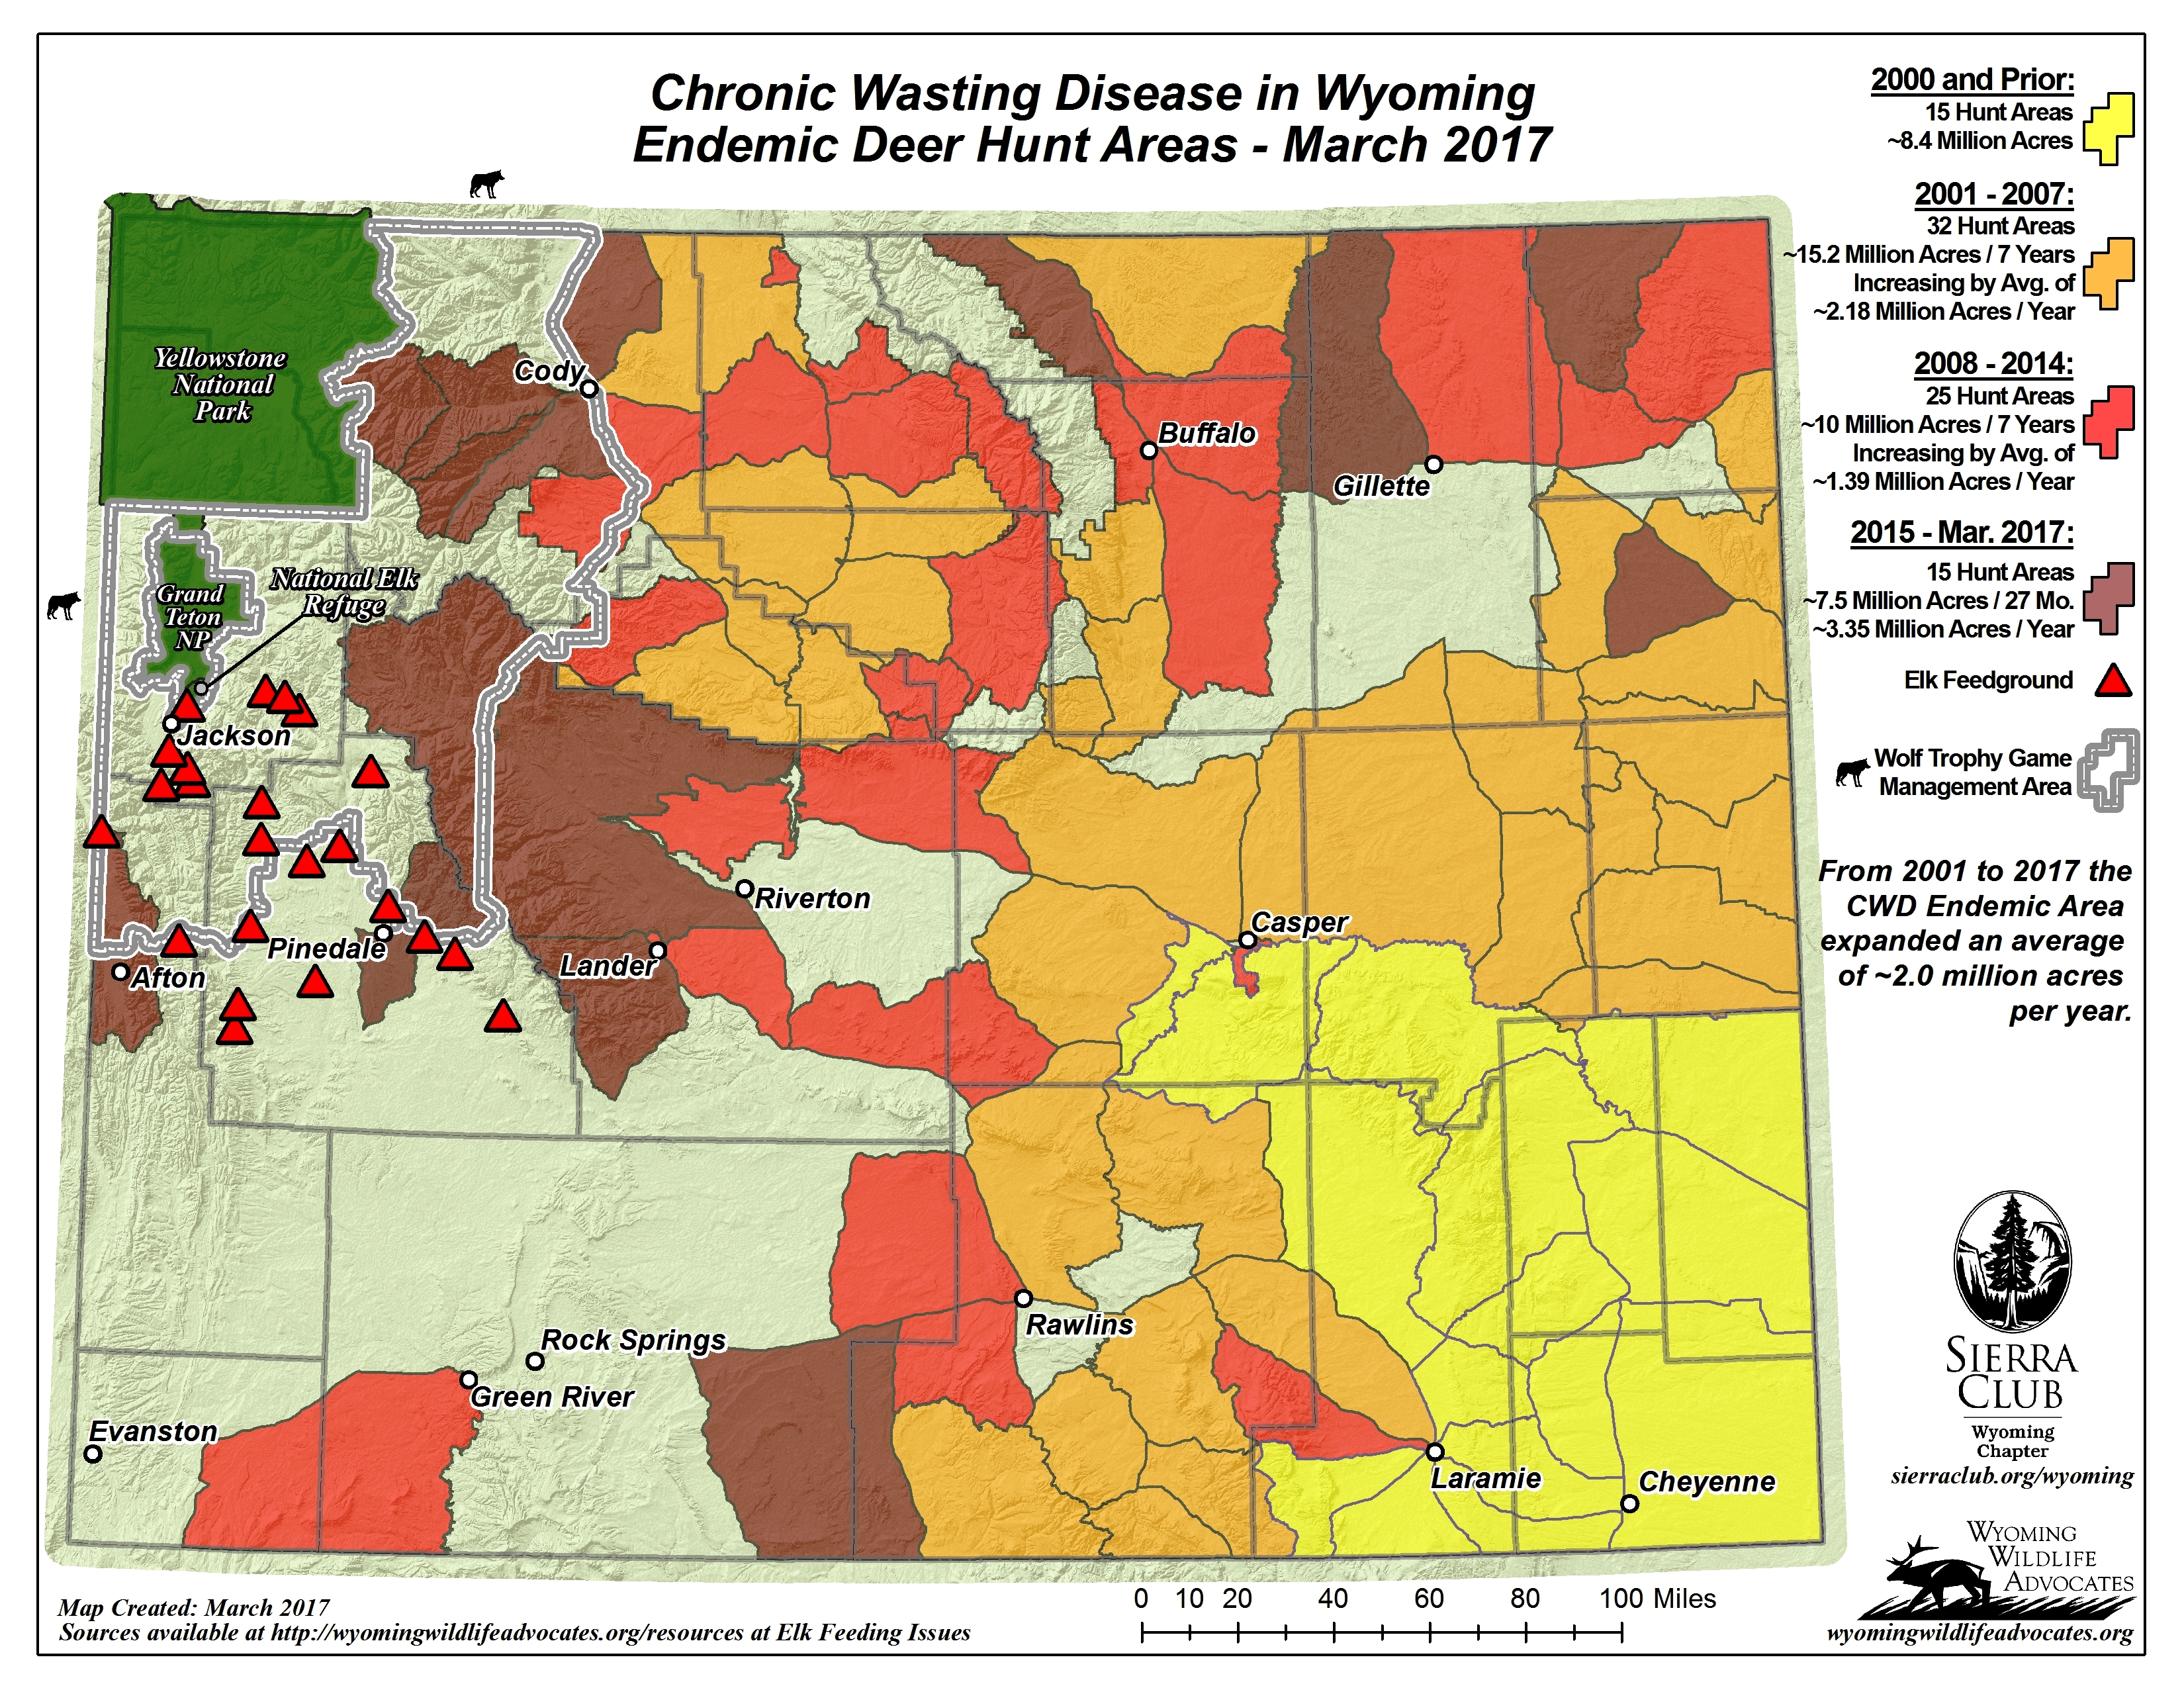 Press Release: Chronic Wasting Disease now in 21 of 23 Wyoming counties